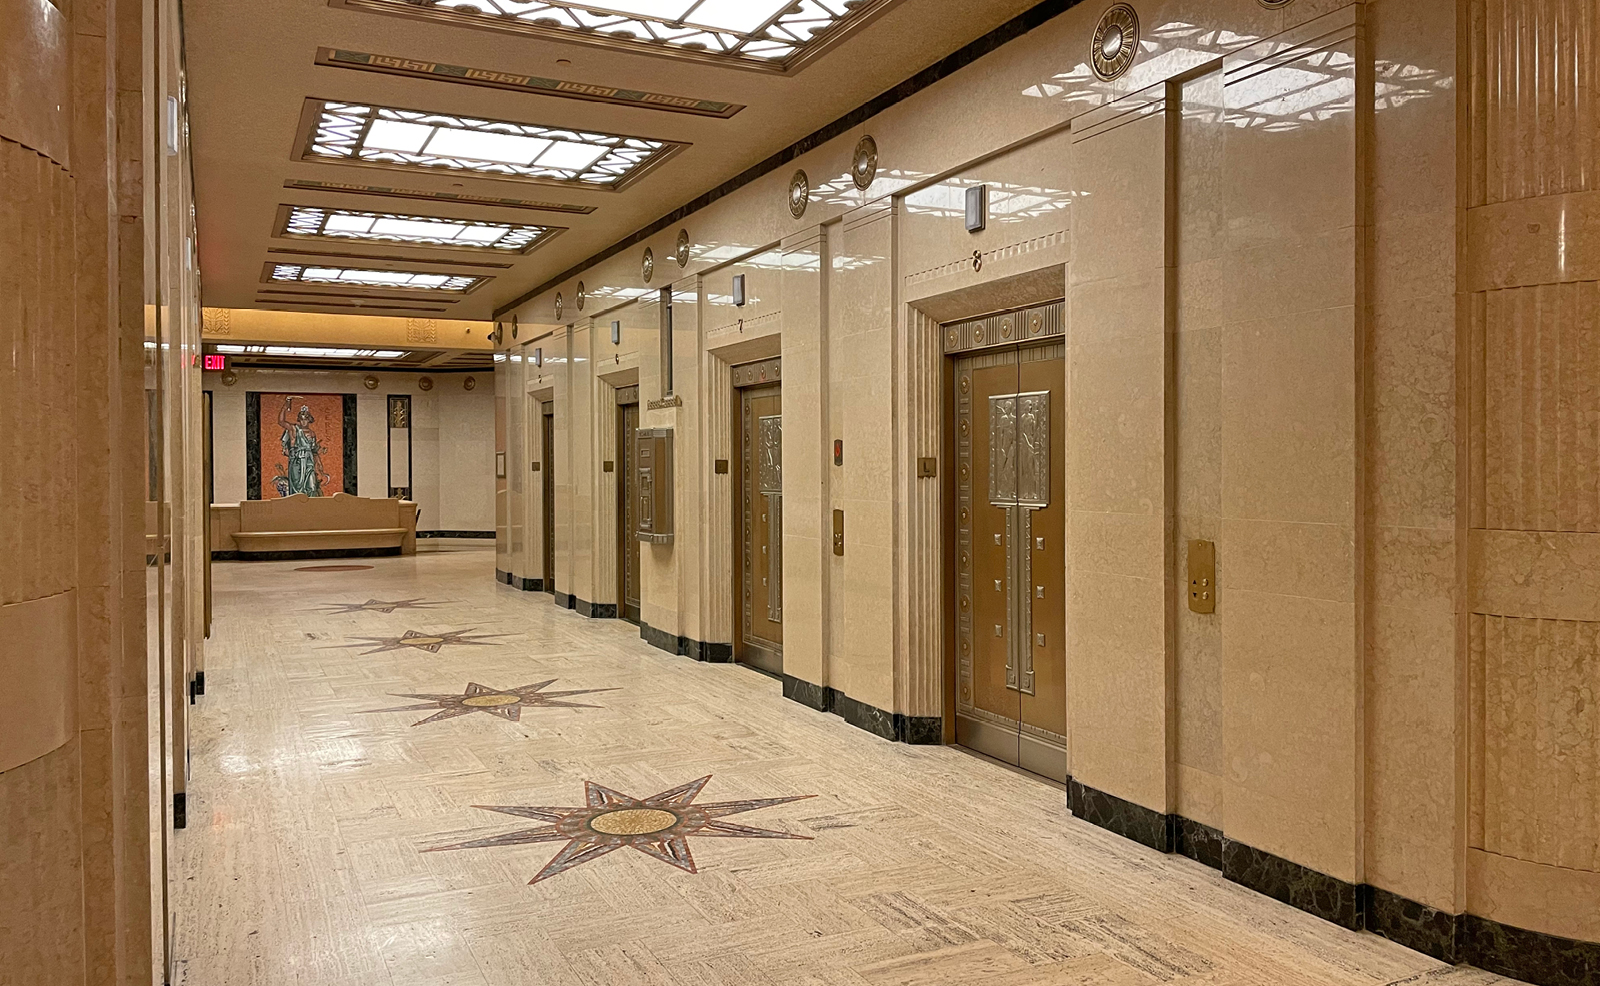 Image of the ornate, bronze elevator doors in the elevator lobby of the Thomas J. Moyer Ohio Judicial Center